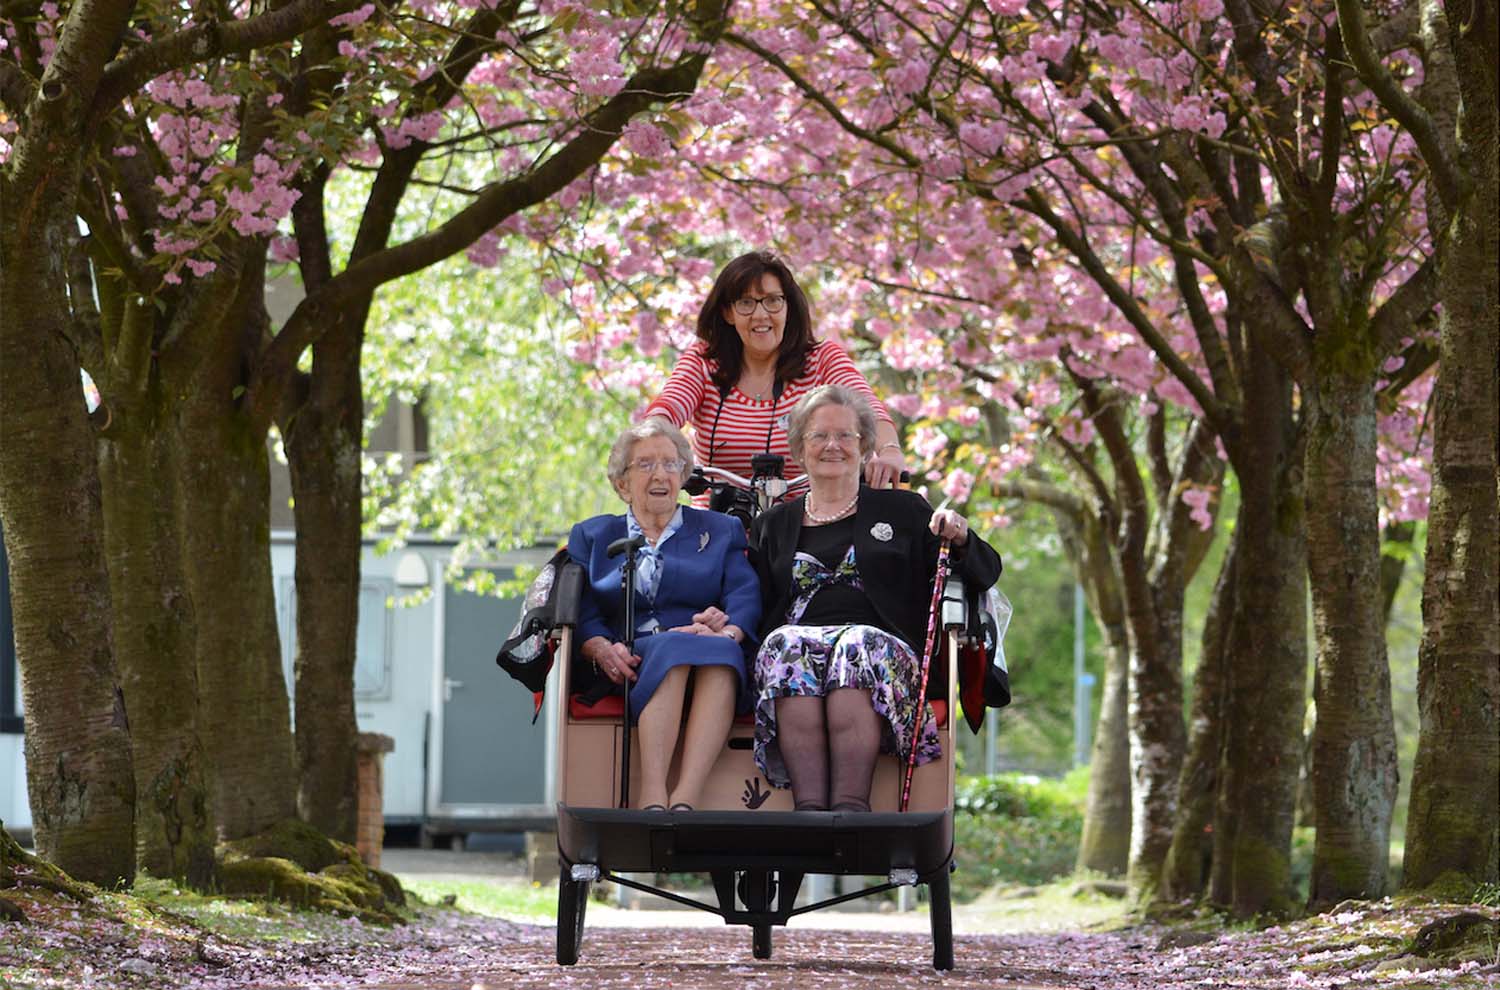 Two elderly women sitting on a trishaw and smiling. A third woman is driving the trishaw on a path with cherry trees in full bloom.